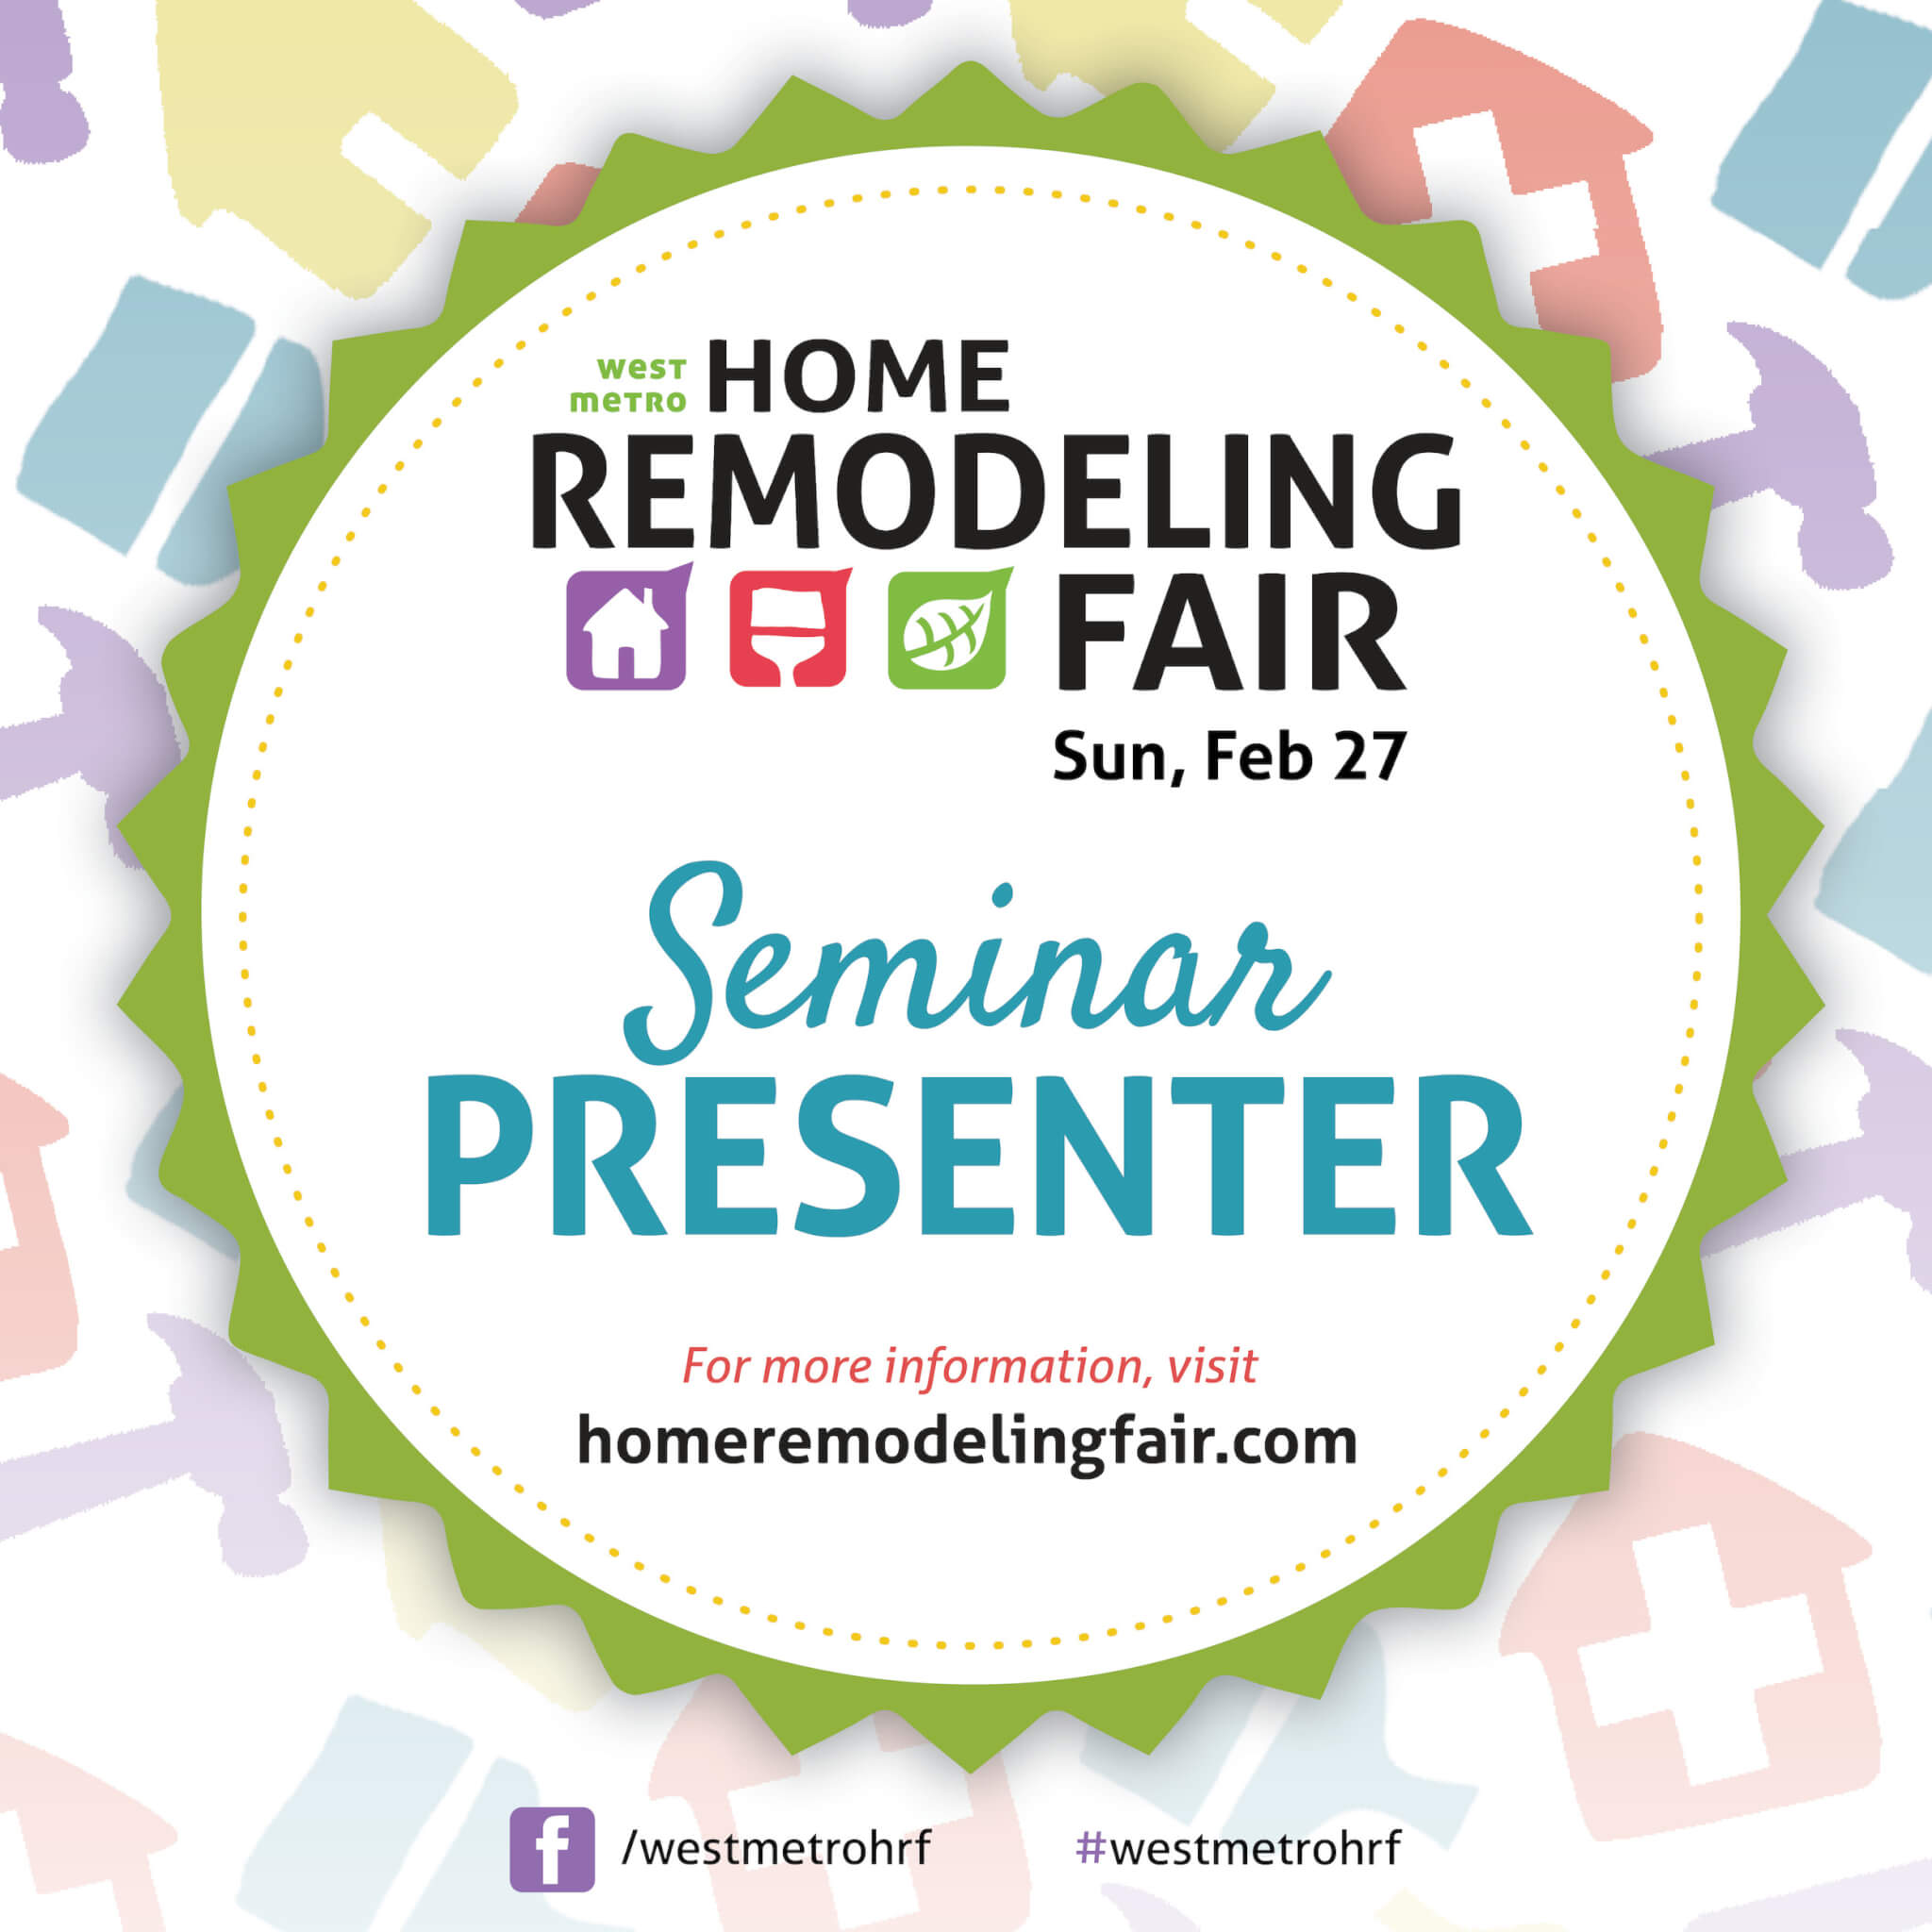 West Metro Home Remodeling Fair, Feb 27 – Save the Date!